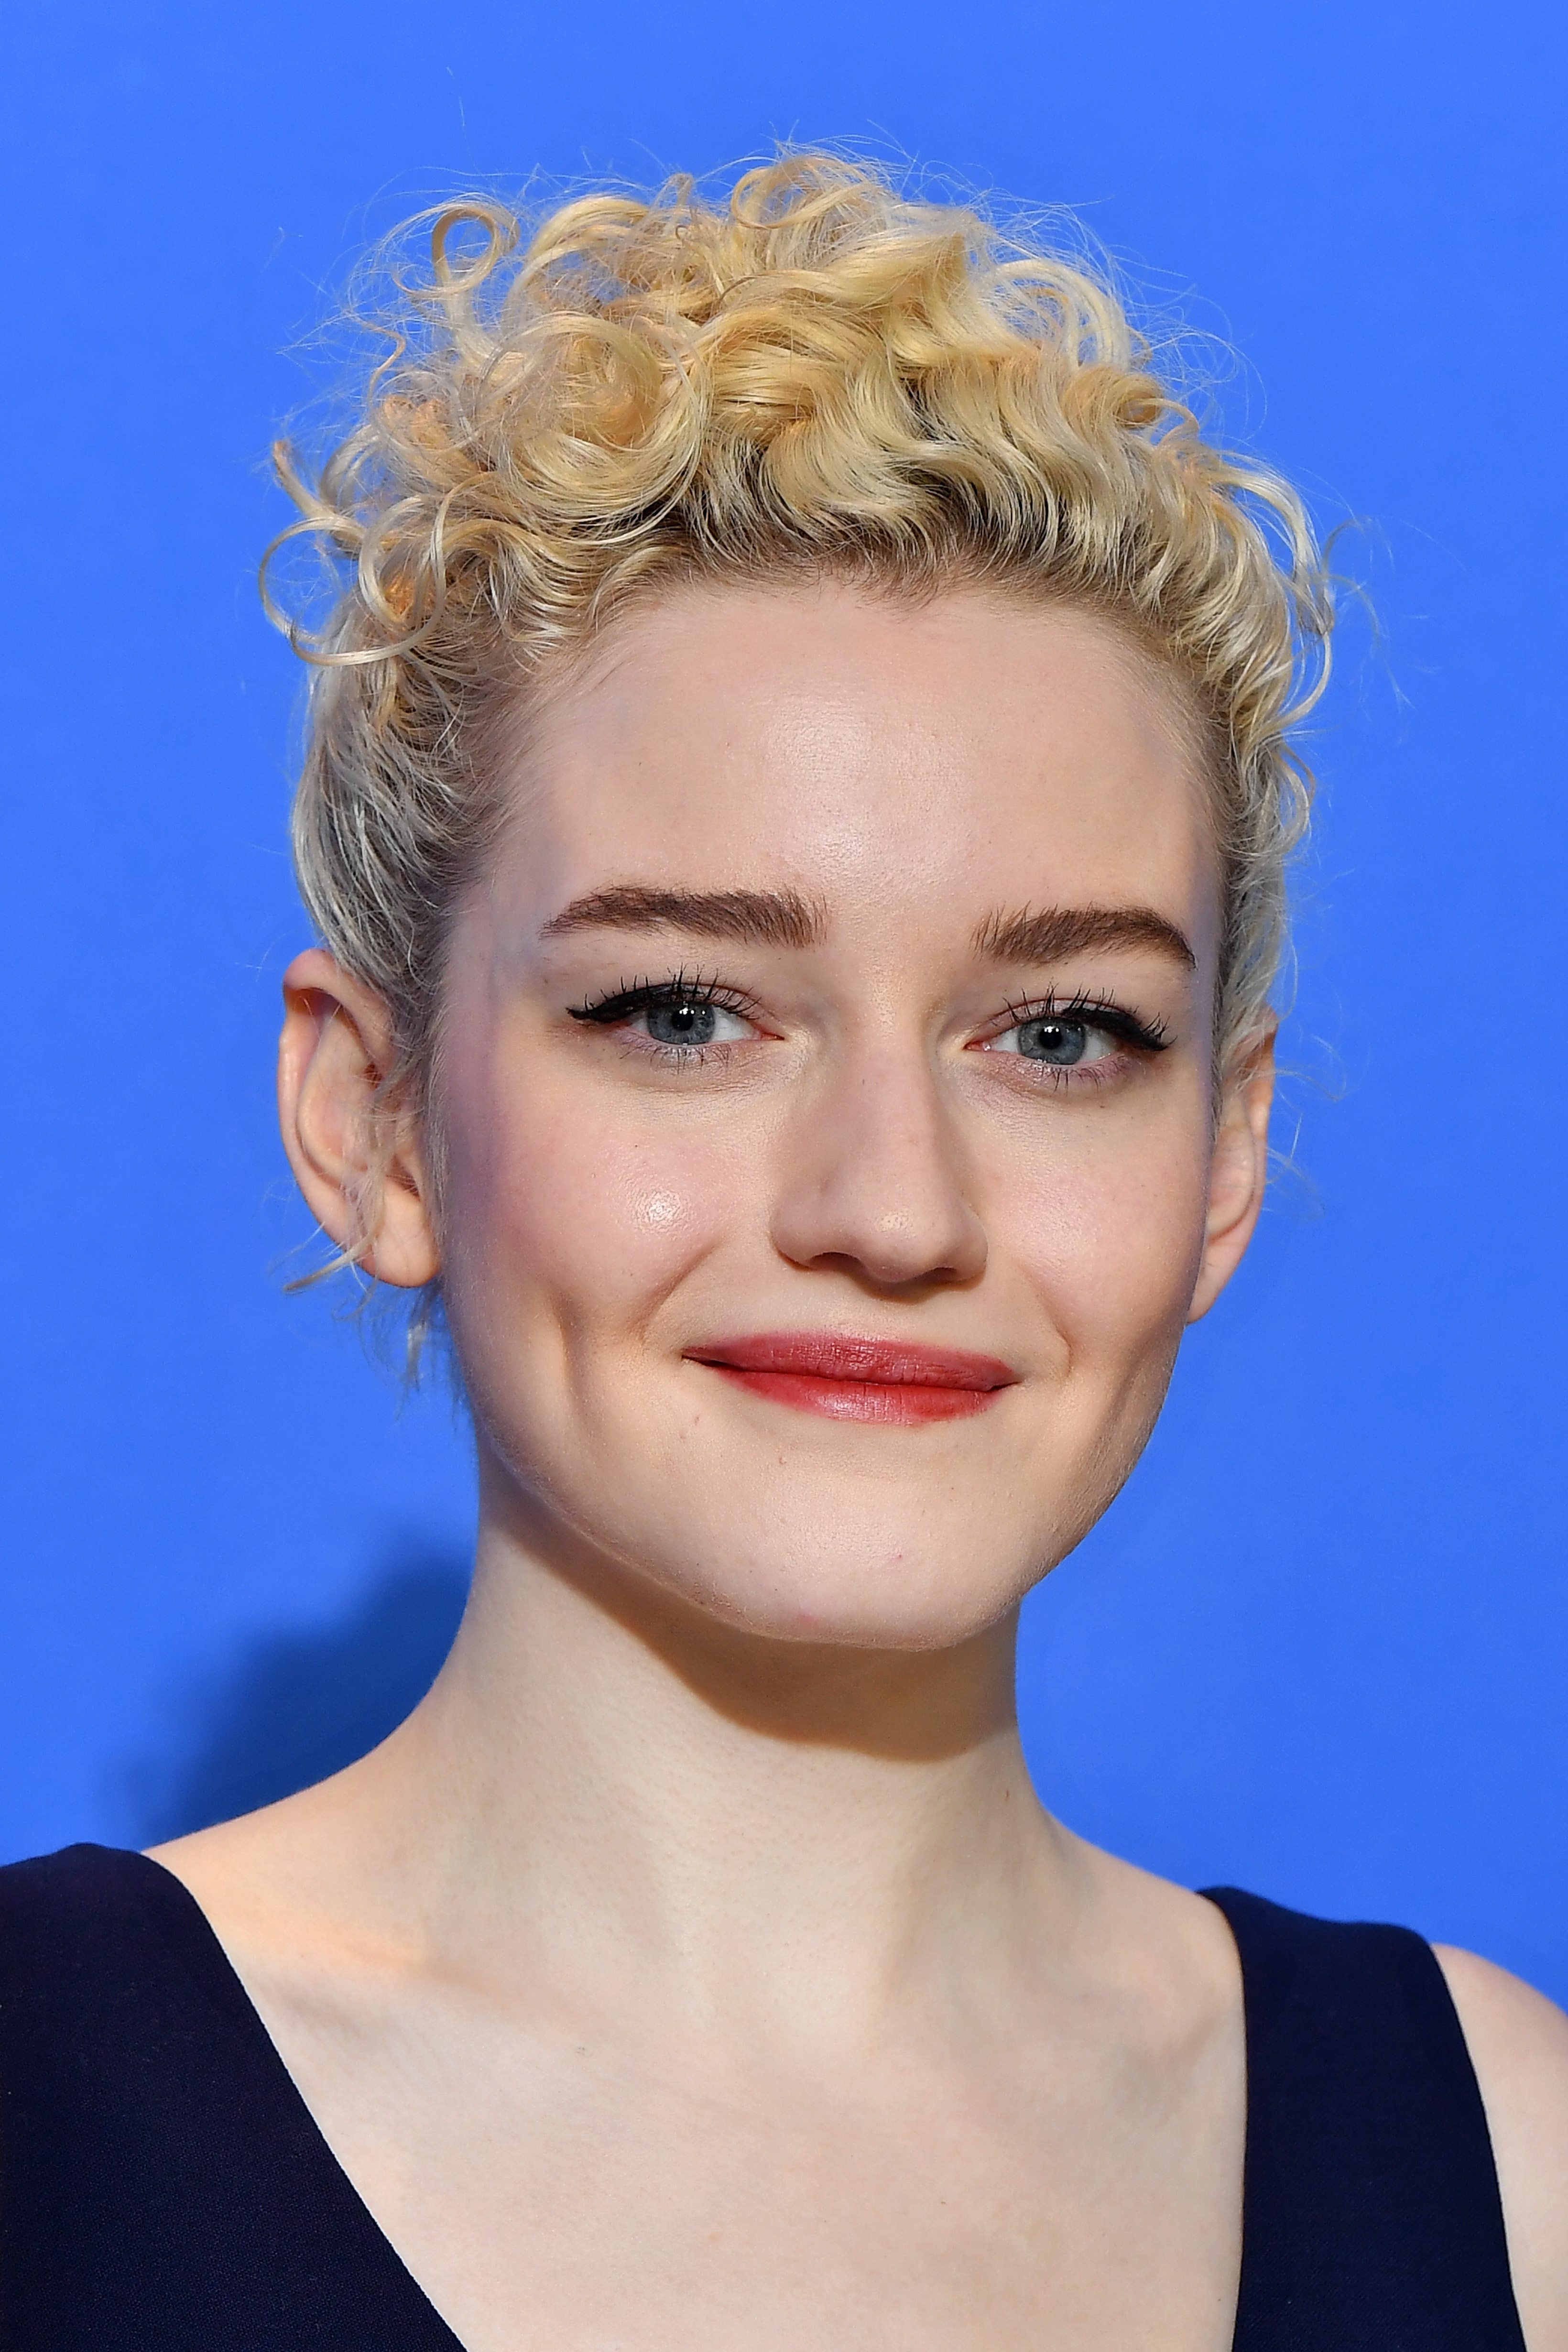 Julia Garner attends "The Assistant" photocall during the 70th Berlinale International Film Festival Berlin at Grand Hyatt Hotel on February 23, 2020, in Berlin, Germany. | Source: Getty Images